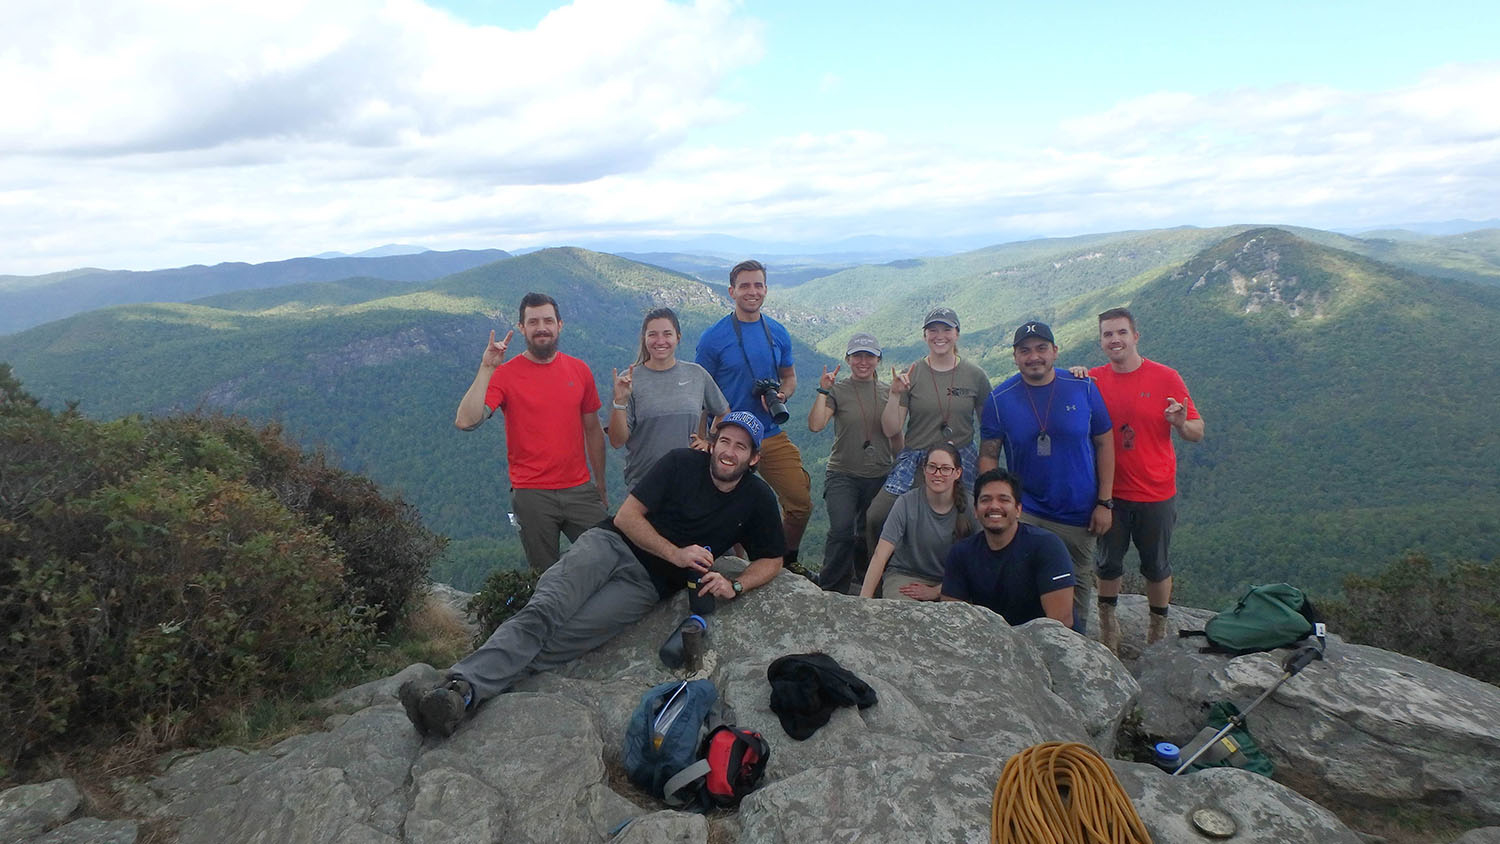 10 smiling people pose for a group photo on top of a mountain